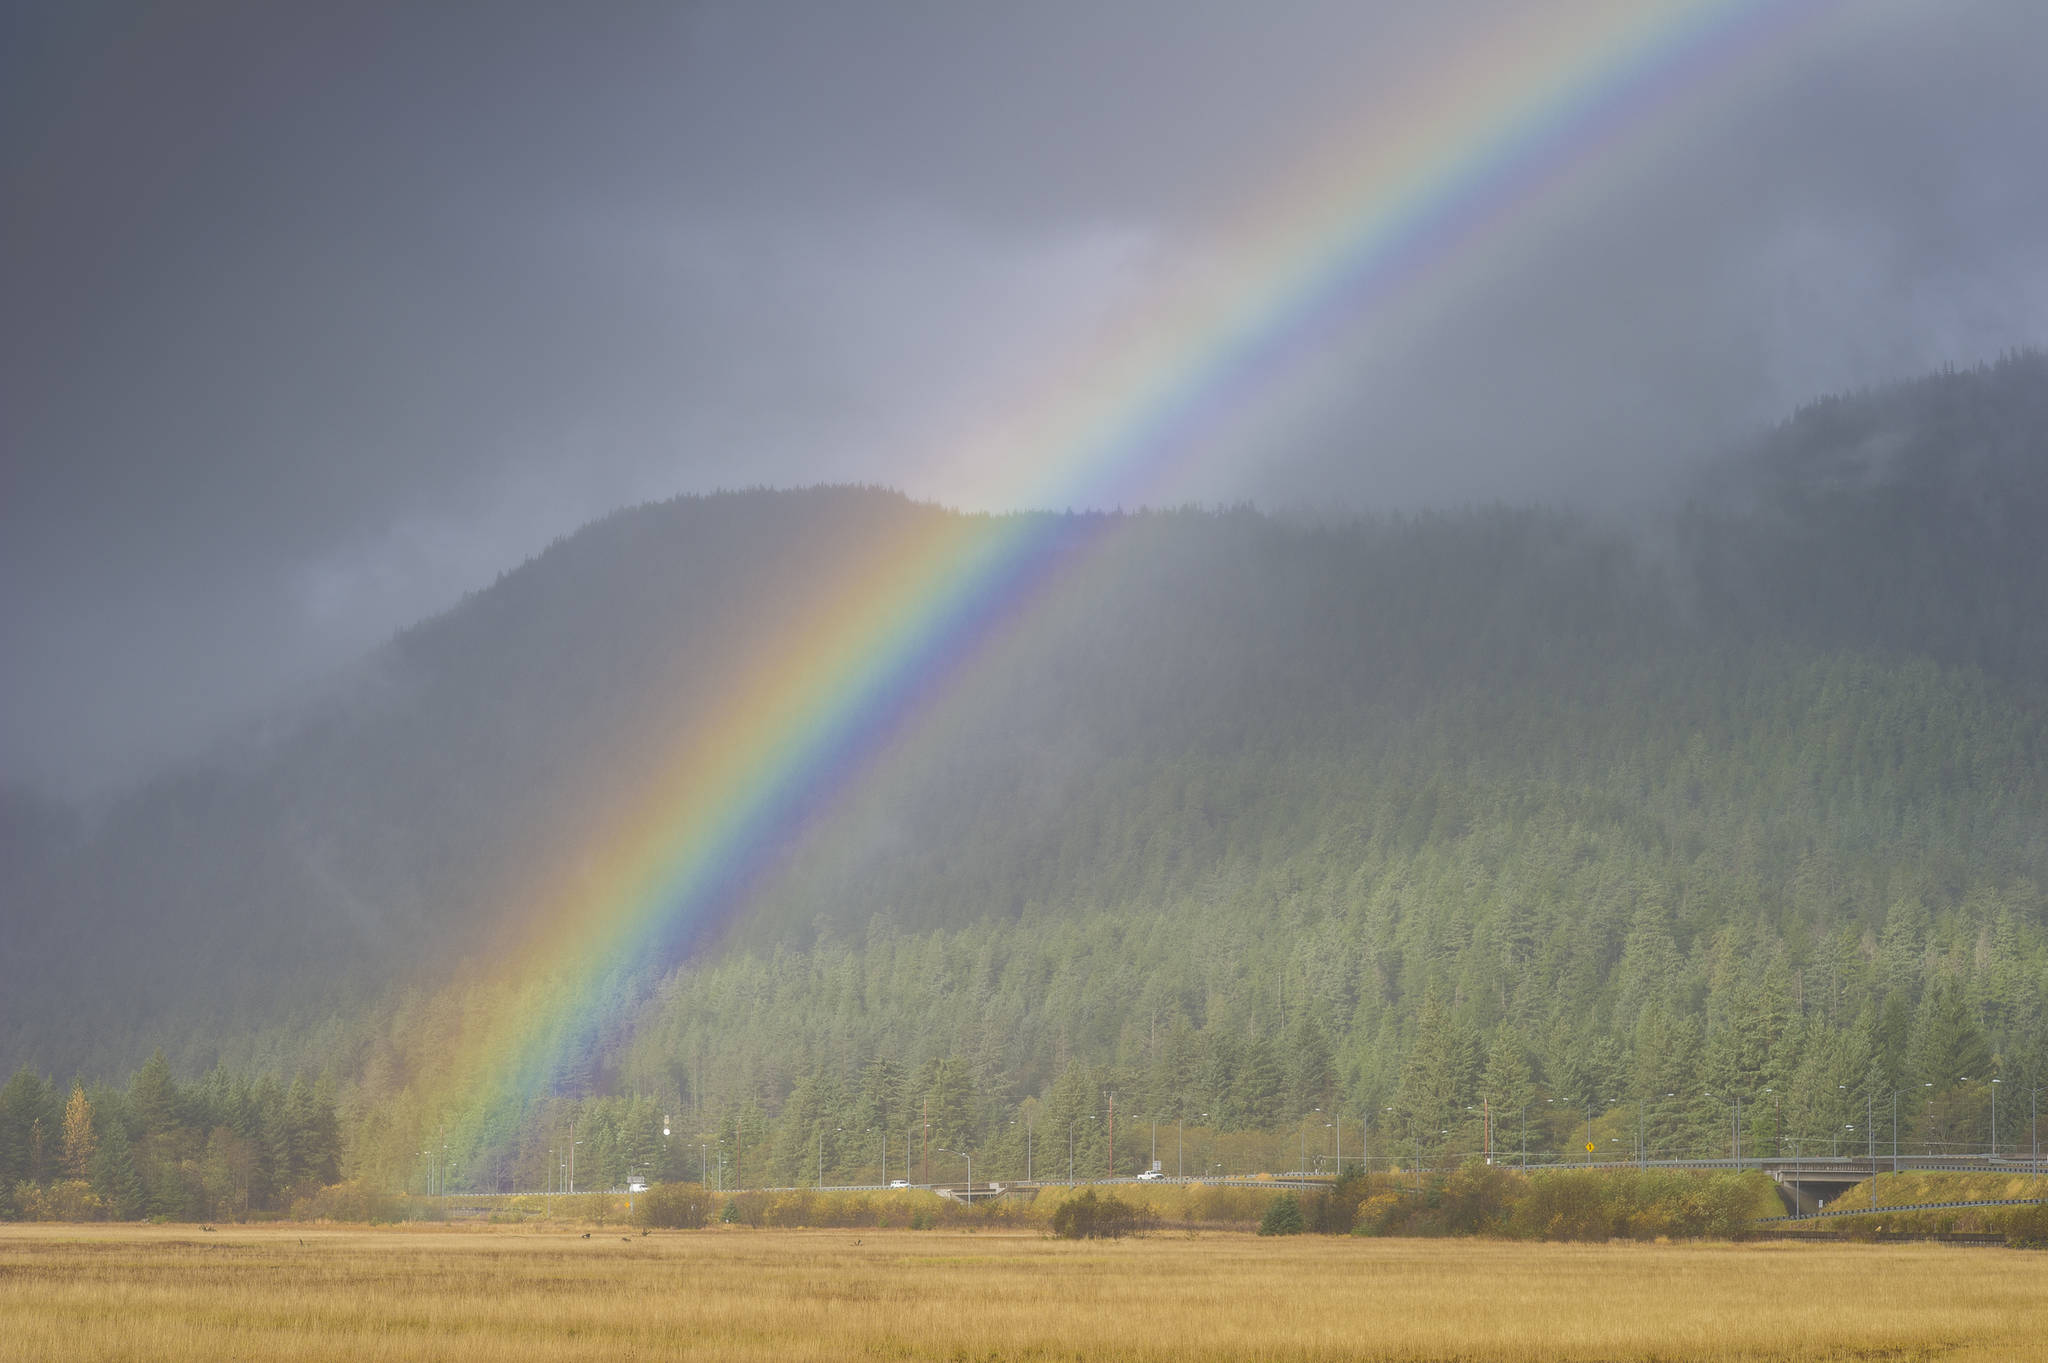 Showers bring a rainbow into view near Sunny Point on Monday, Oct. 15, 2018. (Michael Penn | Juneau Empire)